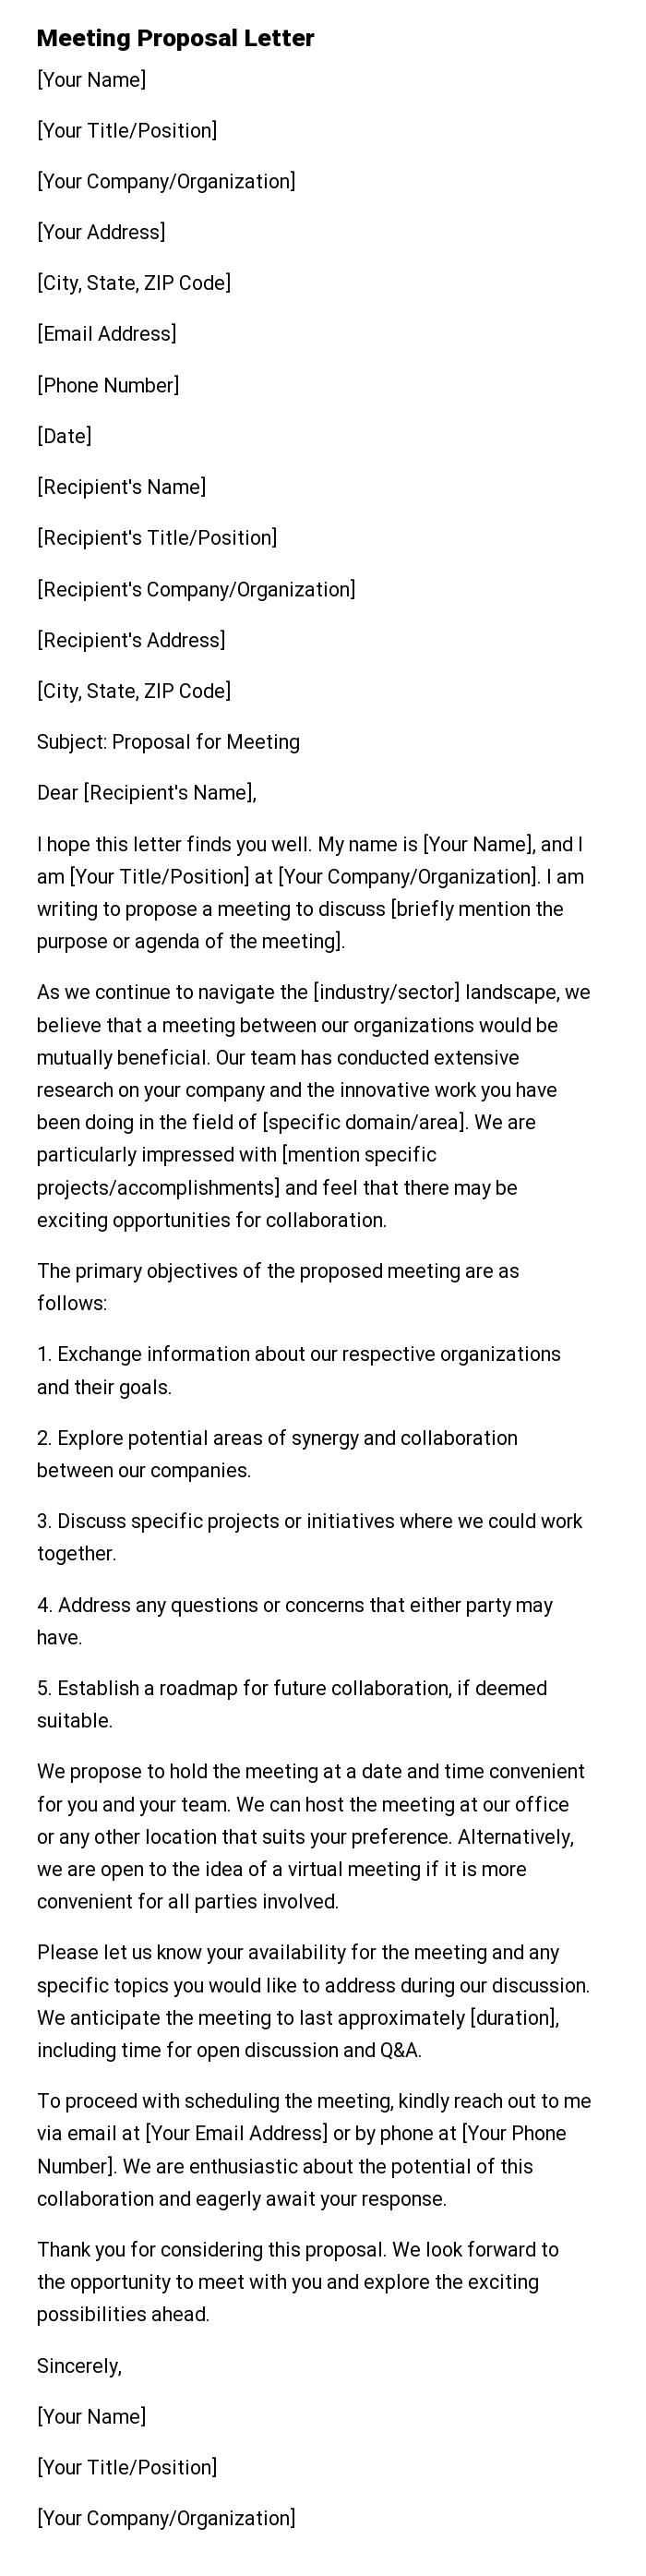 Meeting Proposal Letter